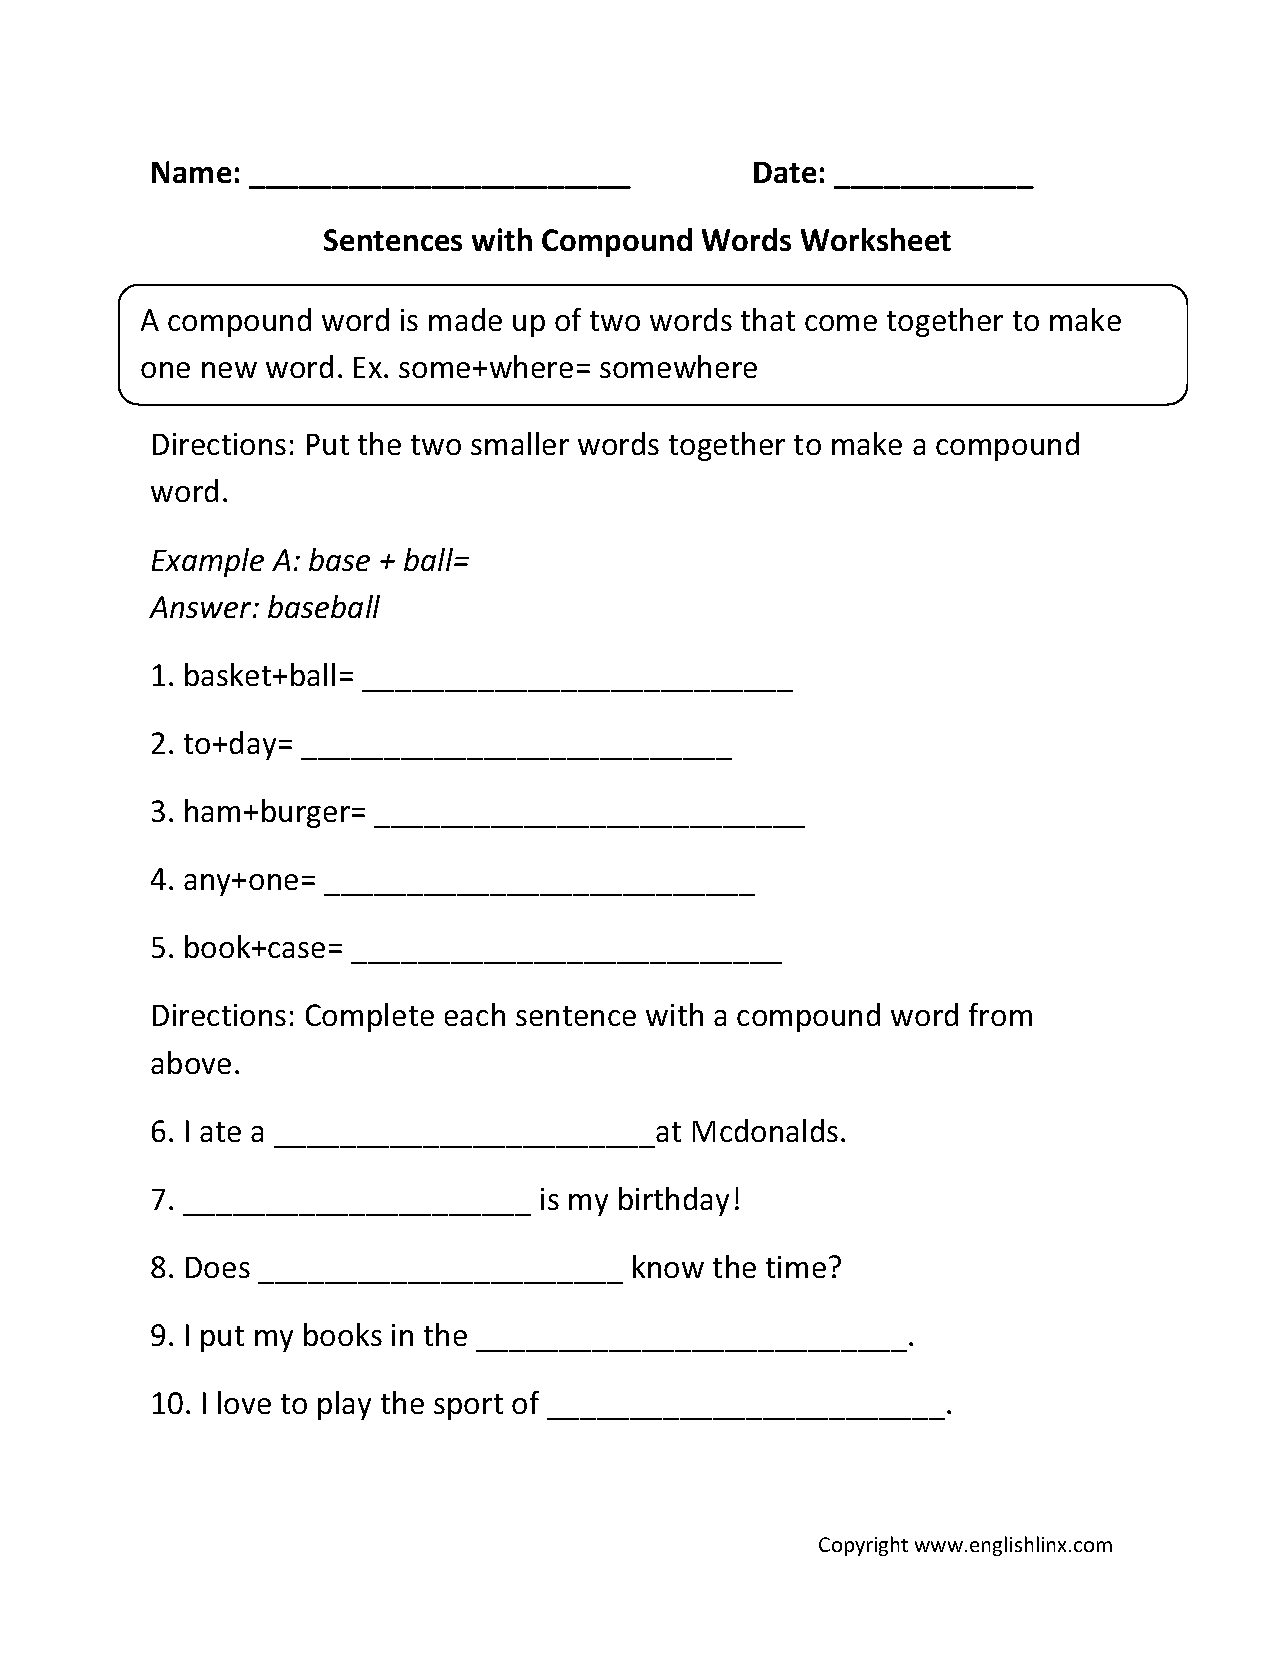 compound-words-worksheets-sentences-with-compound-words-worksheets